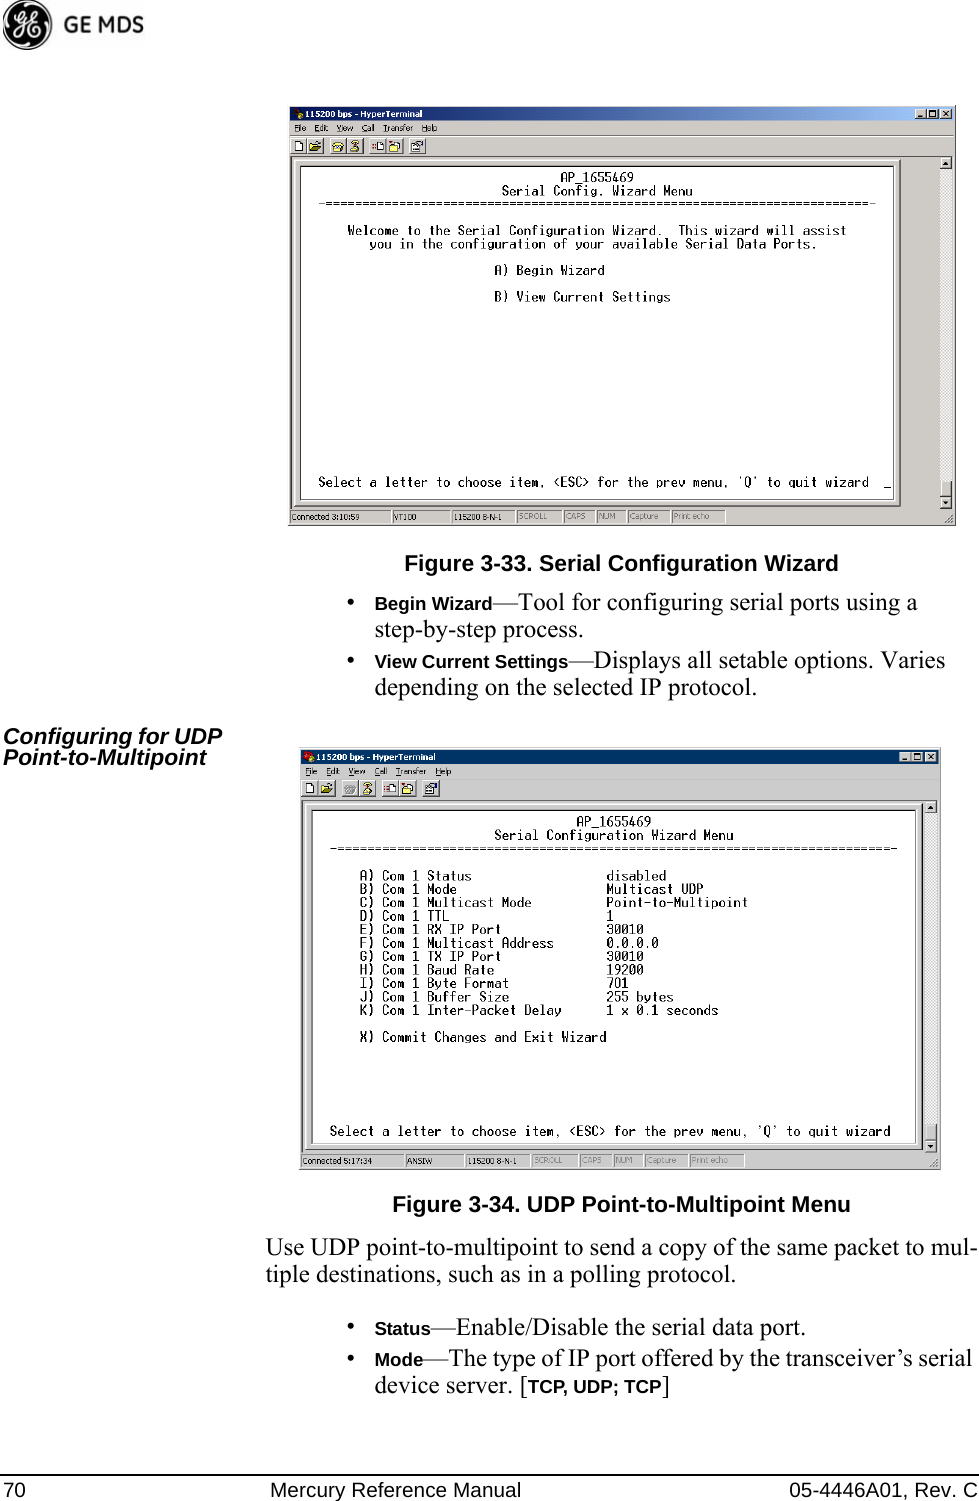 70 Mercury Reference Manual 05-4446A01, Rev. CFigure 3-33. Serial Configuration Wizard•Begin Wizard—Tool for configuring serial ports using a step-by-step process.•View Current Settings—Displays all setable options. Varies depending on the selected IP protocol.Configuring for UDP Point-to-Multipoint Invisible place holderFigure 3-34. UDP Point-to-Multipoint MenuUse UDP point-to-multipoint to send a copy of the same packet to mul-tiple destinations, such as in a polling protocol.•Status—Enable/Disable the serial data port.•Mode—The type of IP port offered by the transceiver’s serial device server. [TCP, UDP; TCP] 